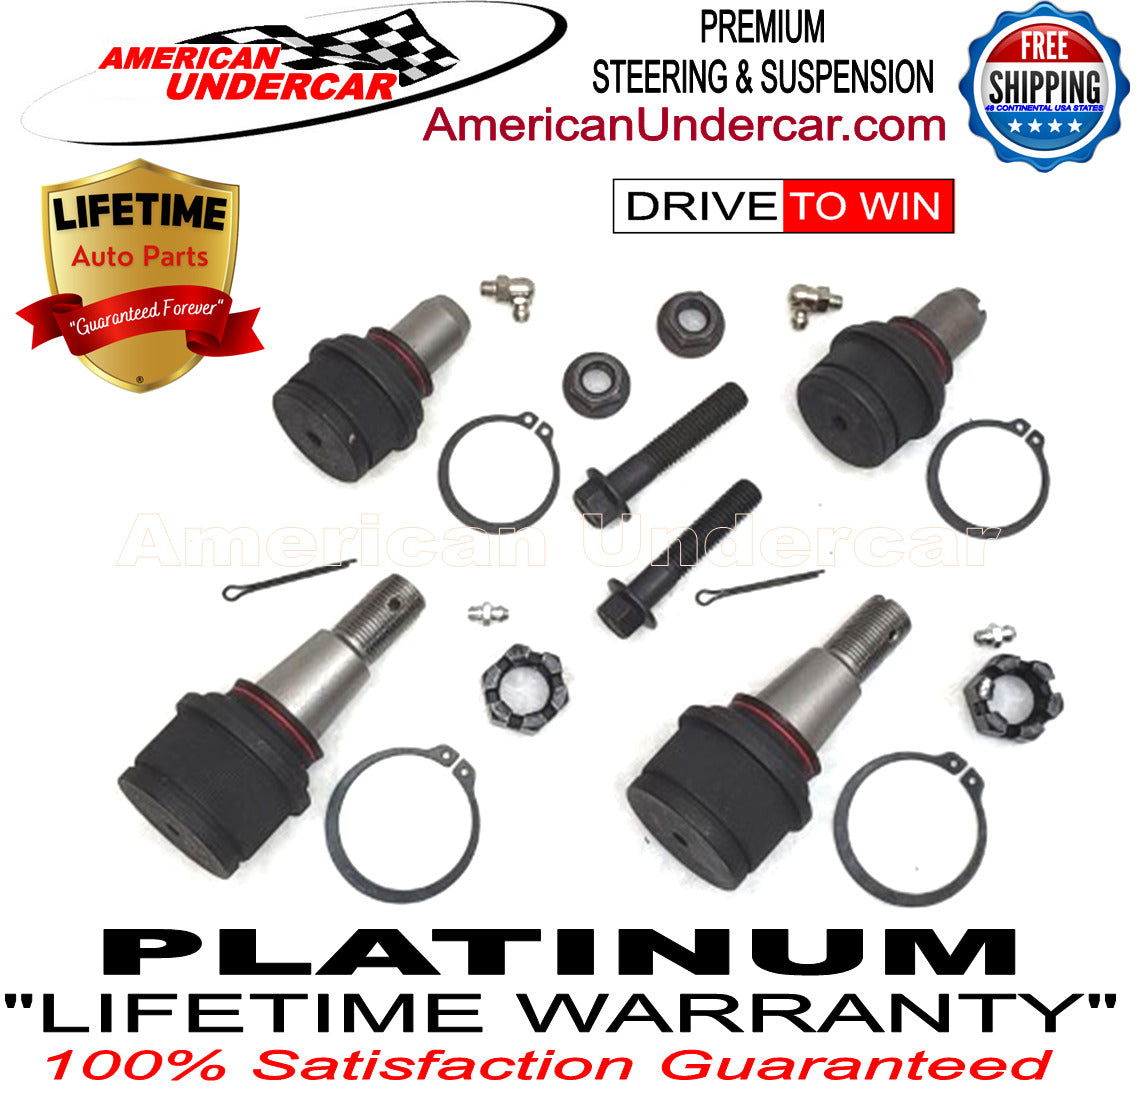 Lifetime Ball Joints Upper and Lower Suspension Kit for 2007-2014 Ford E150 2WD